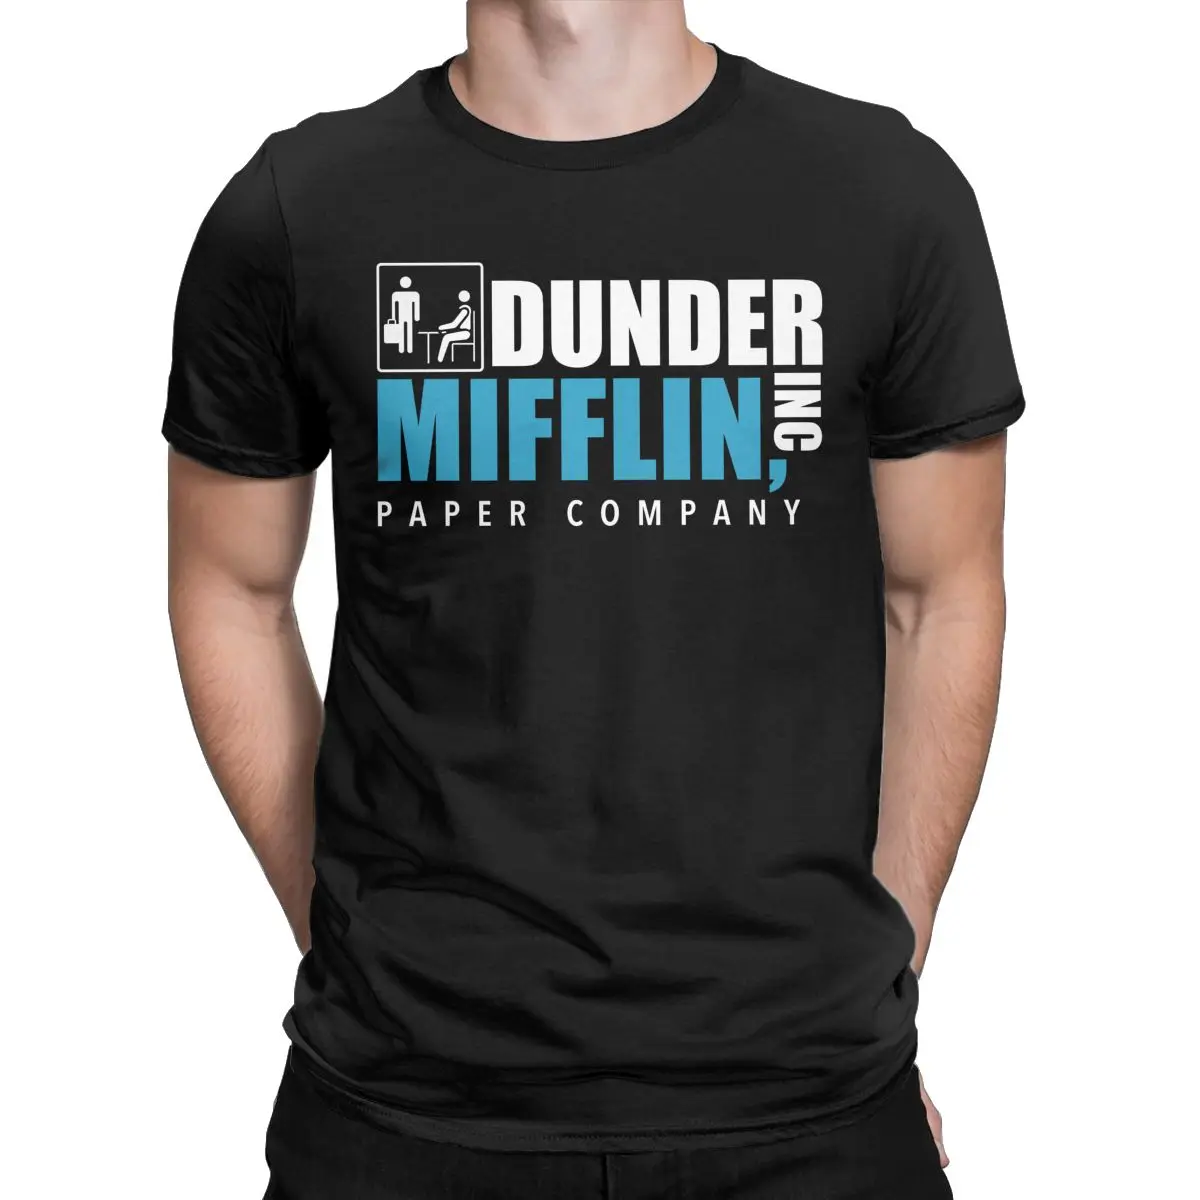 

Dunder Mifflin Paper Company t shirt for men Pure Cotton Funny T-Shirts Round Neck Tees Short Sleeve Clothing Gift Idea